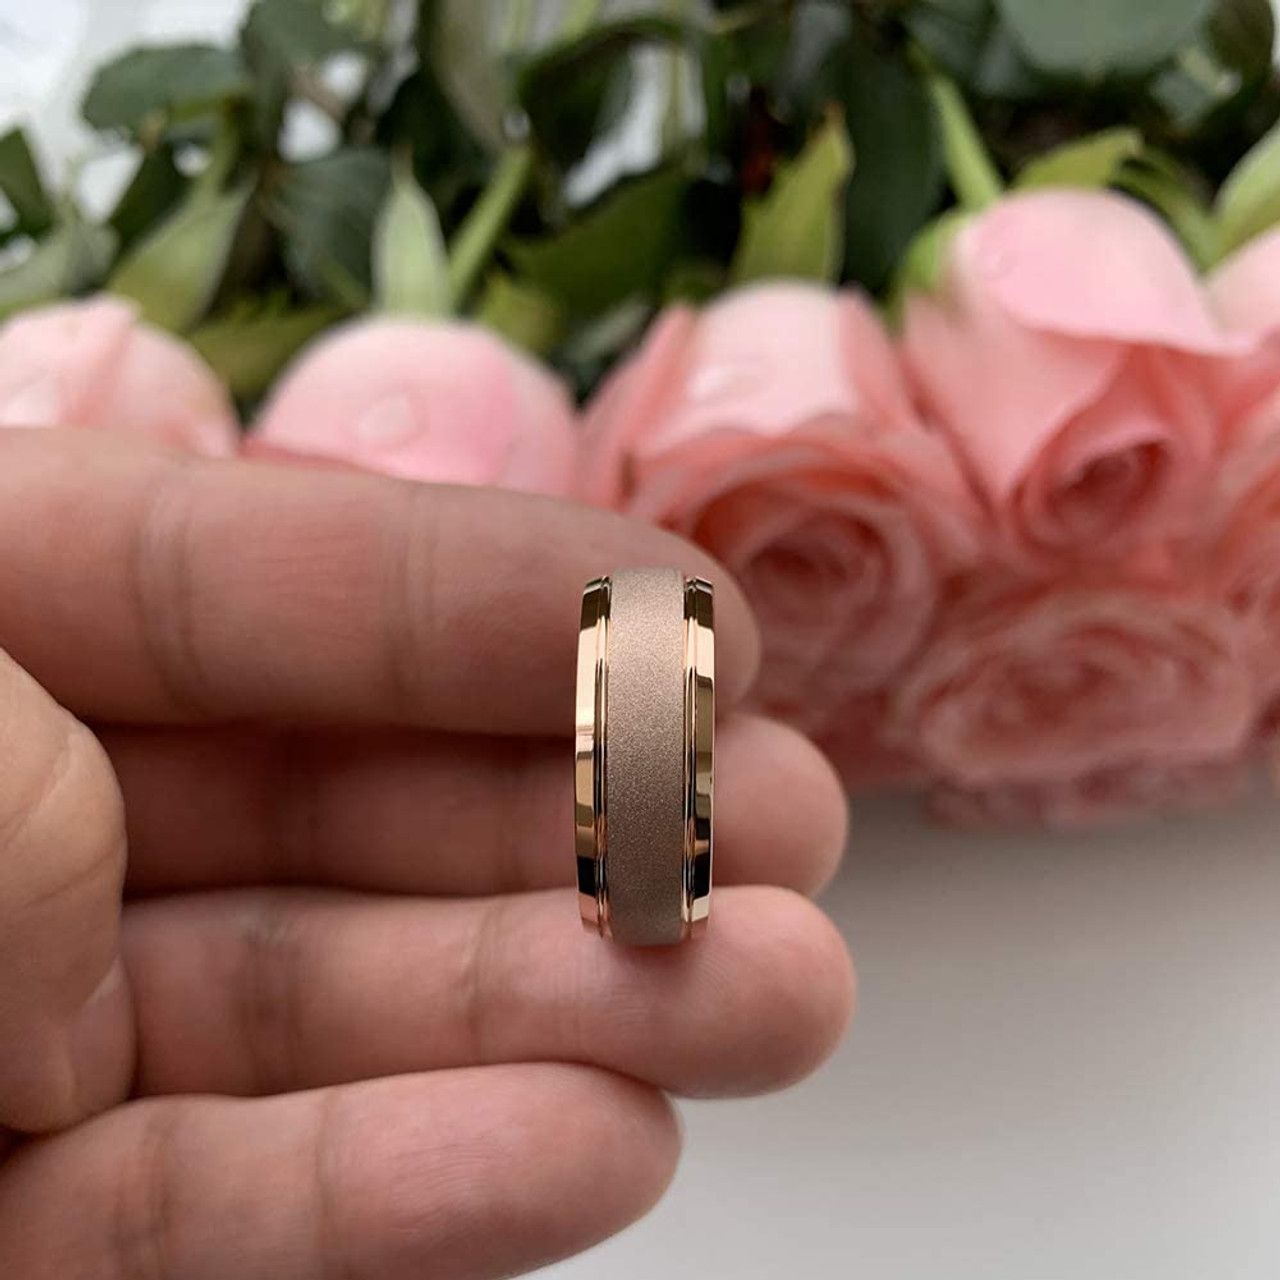 (8mm) Unisex or Men's Tungsten Carbide Wedding Ring Band. Rose Gold Domed Top Ring. Sand Blasted Glitter Design with High Polish Edges. Comfort Fit.